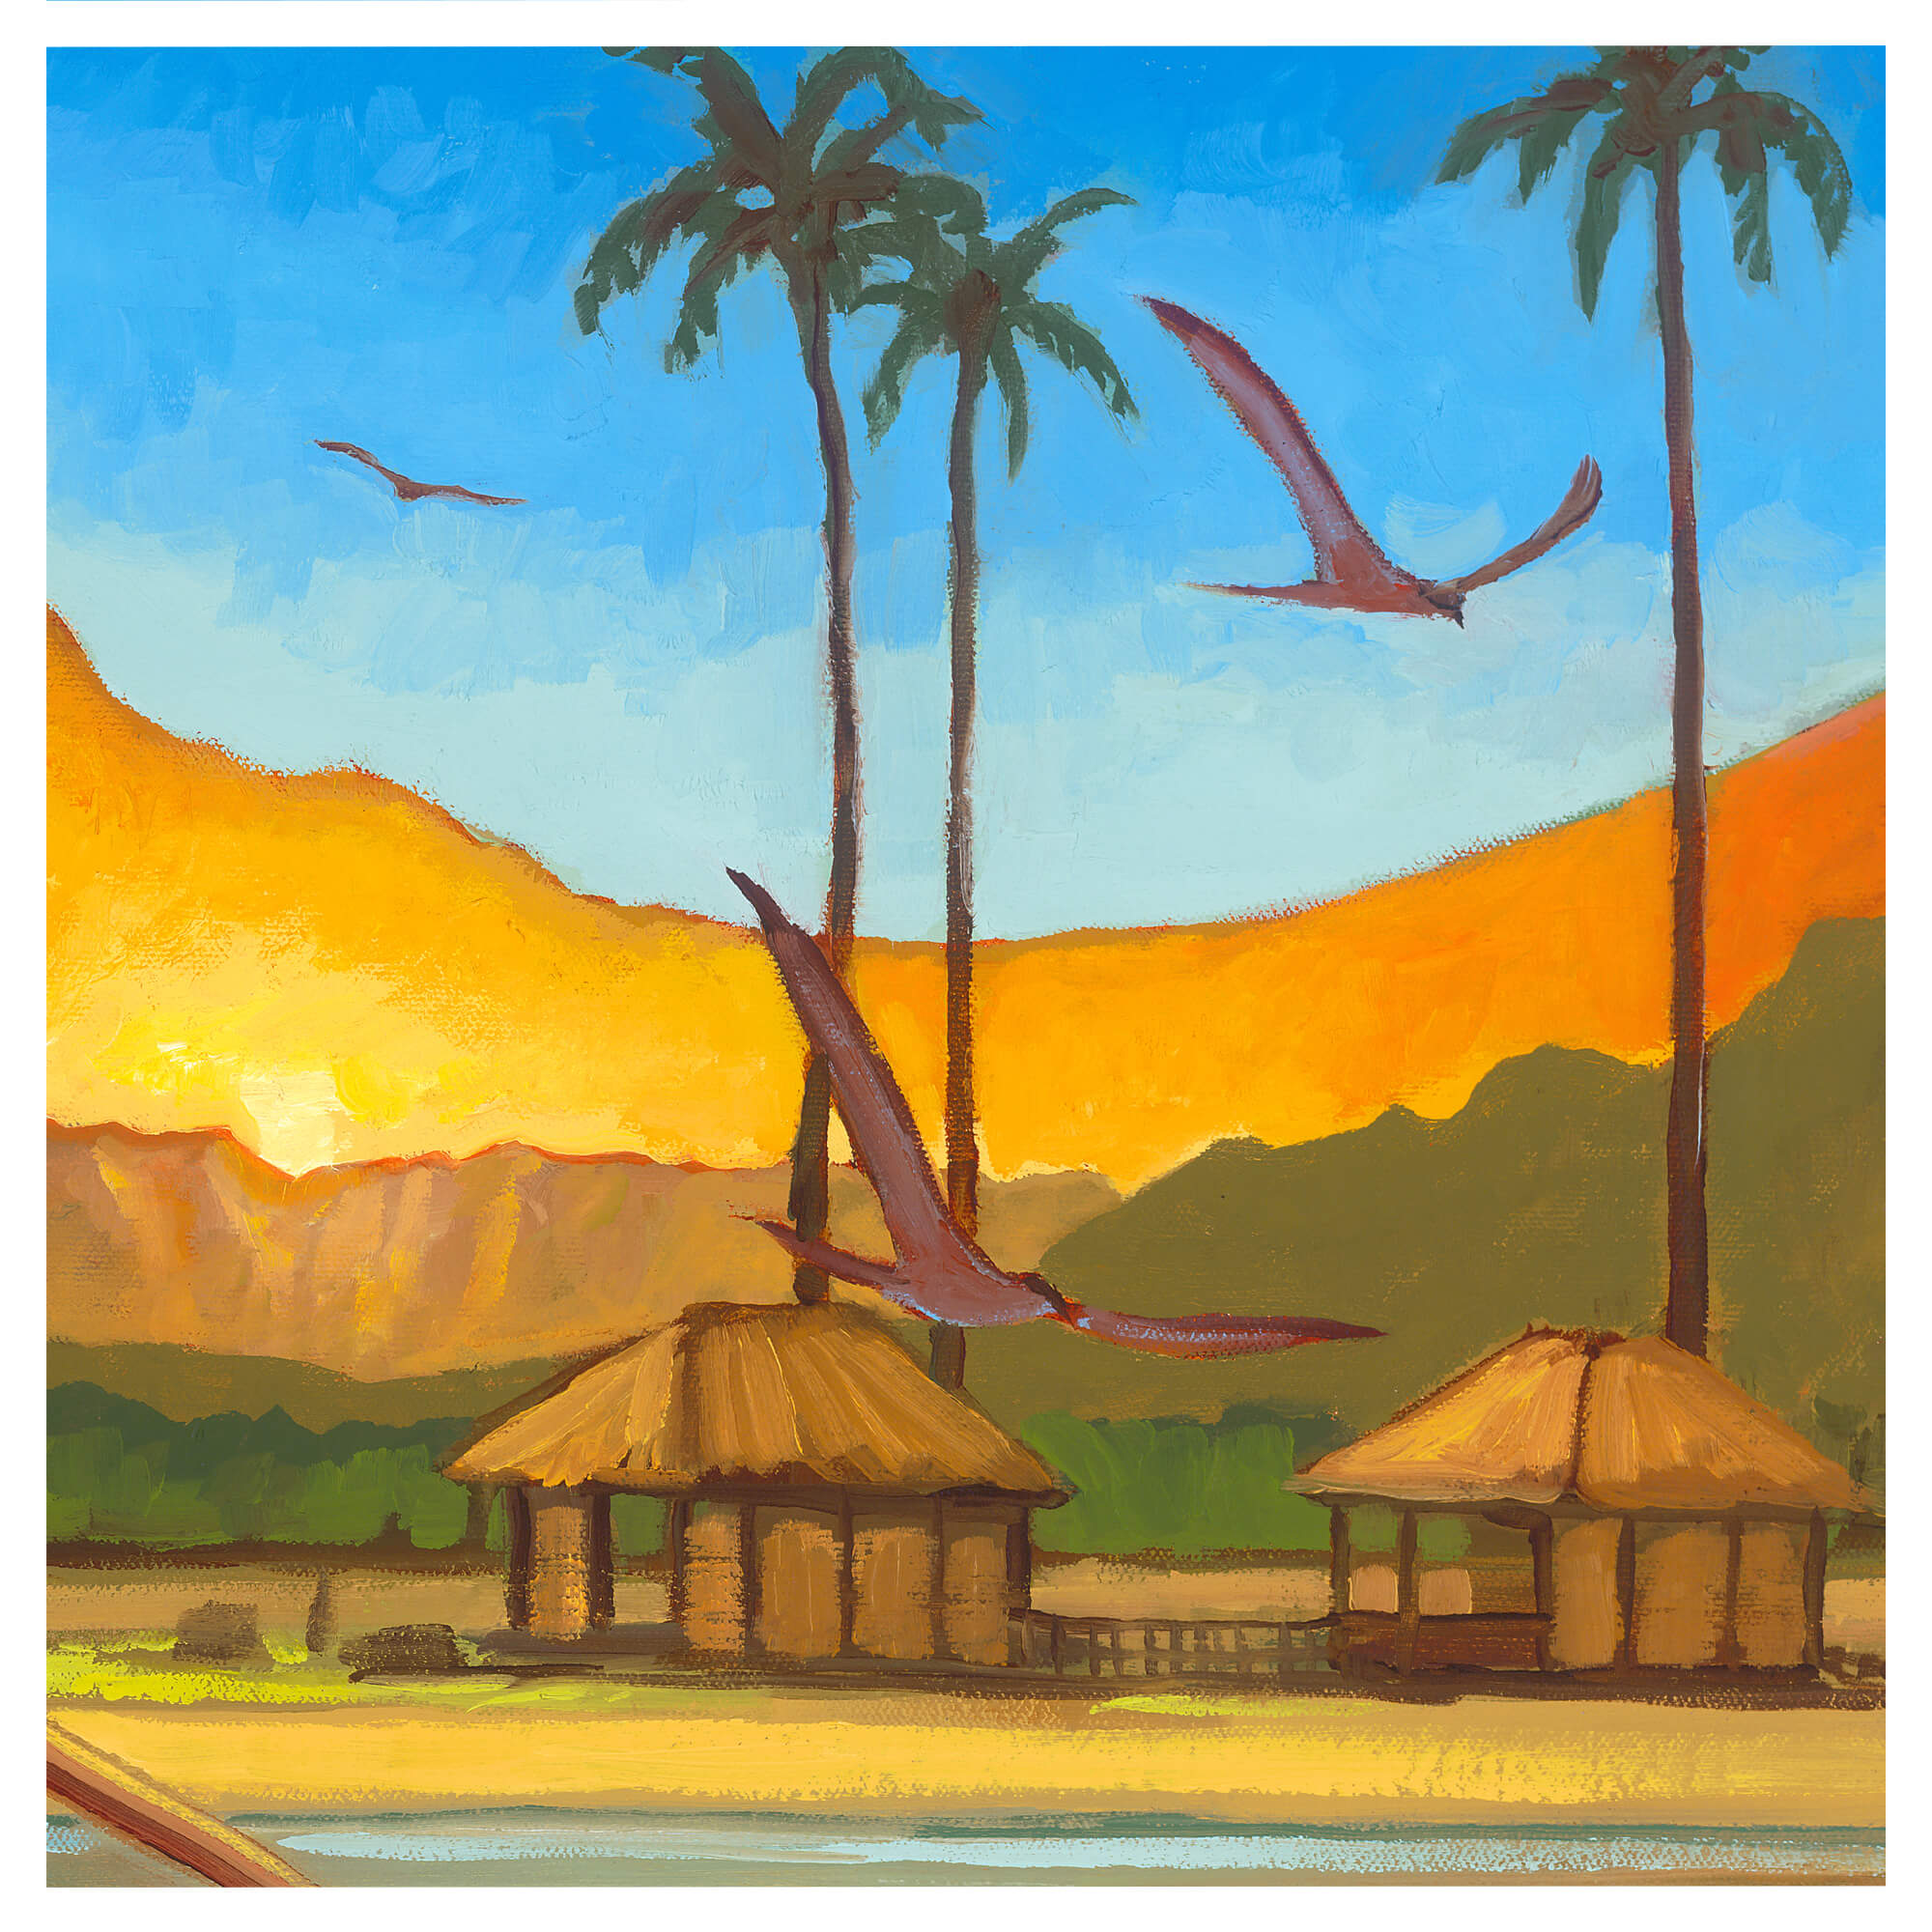 Birds above a tropical island with huts by Hawaii artist Colin Redican